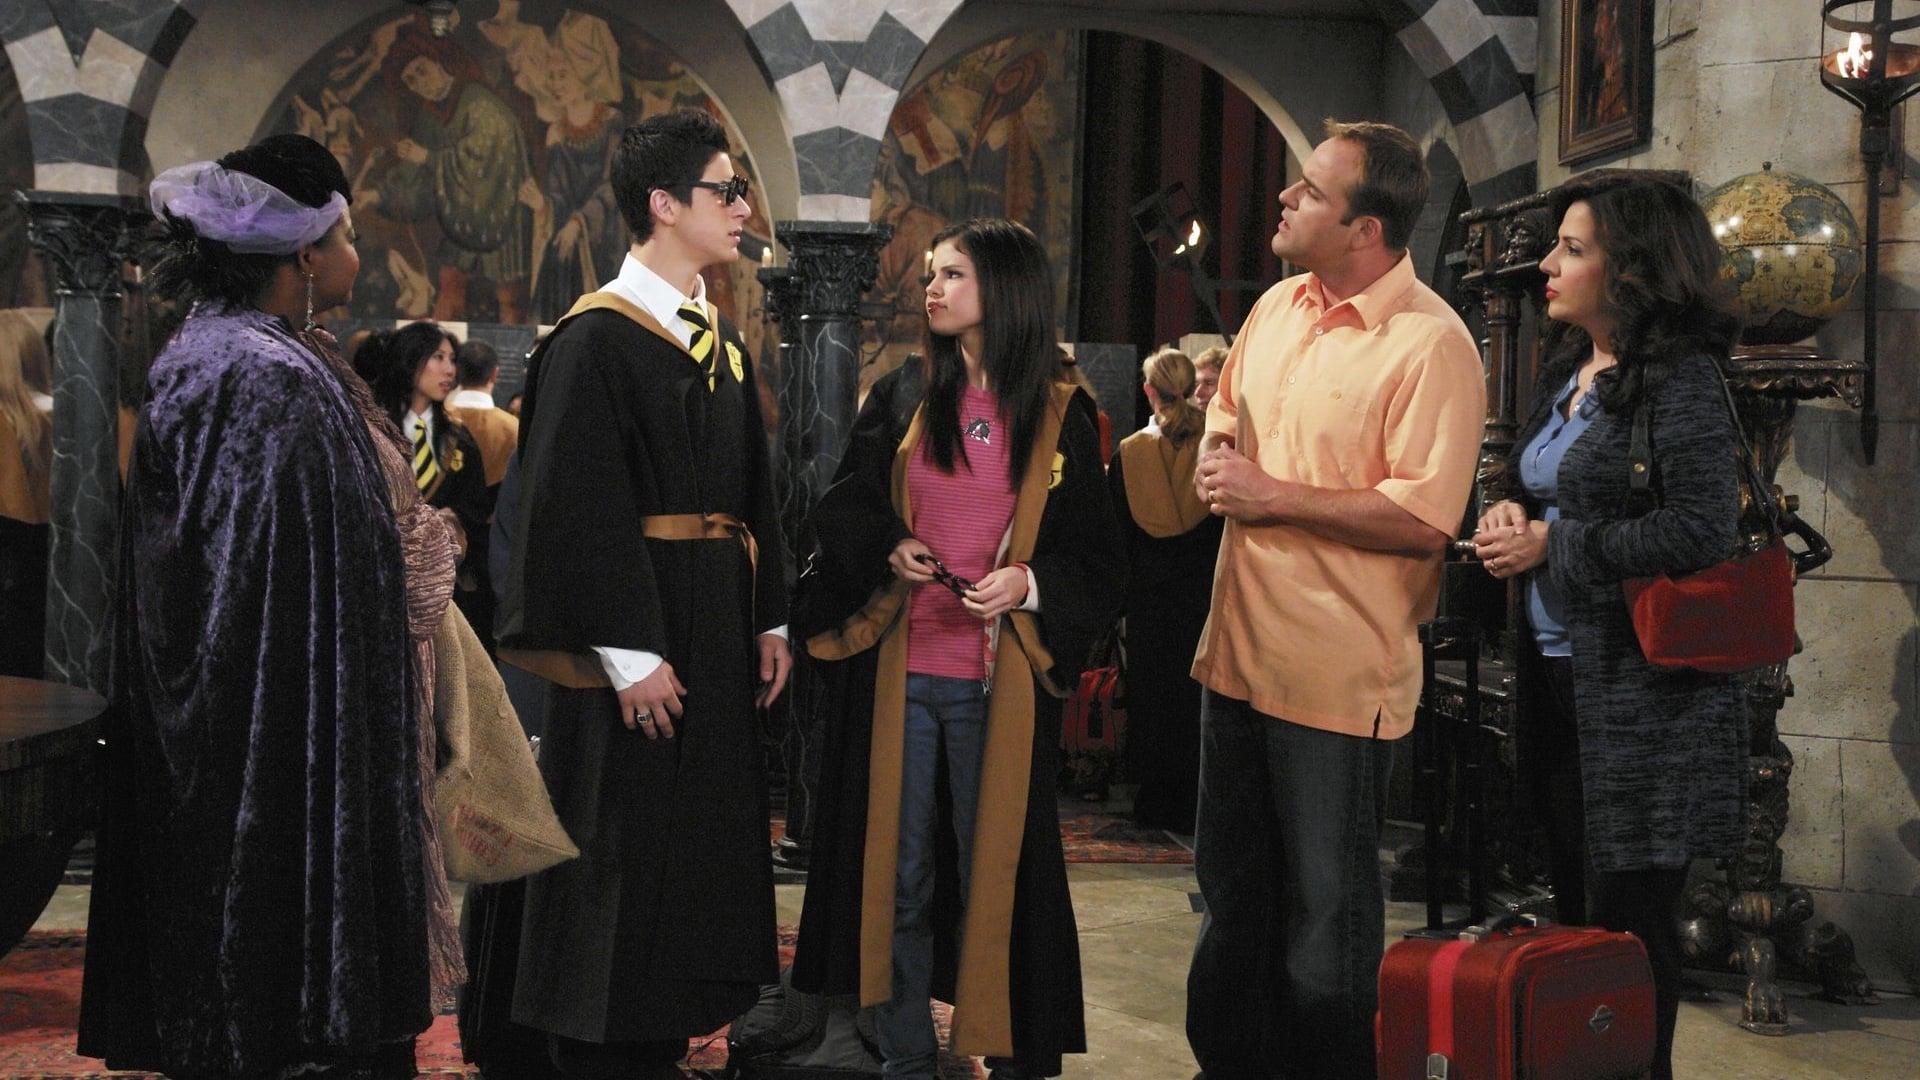 Wizards of Waverly Place: Wizard School backdrop